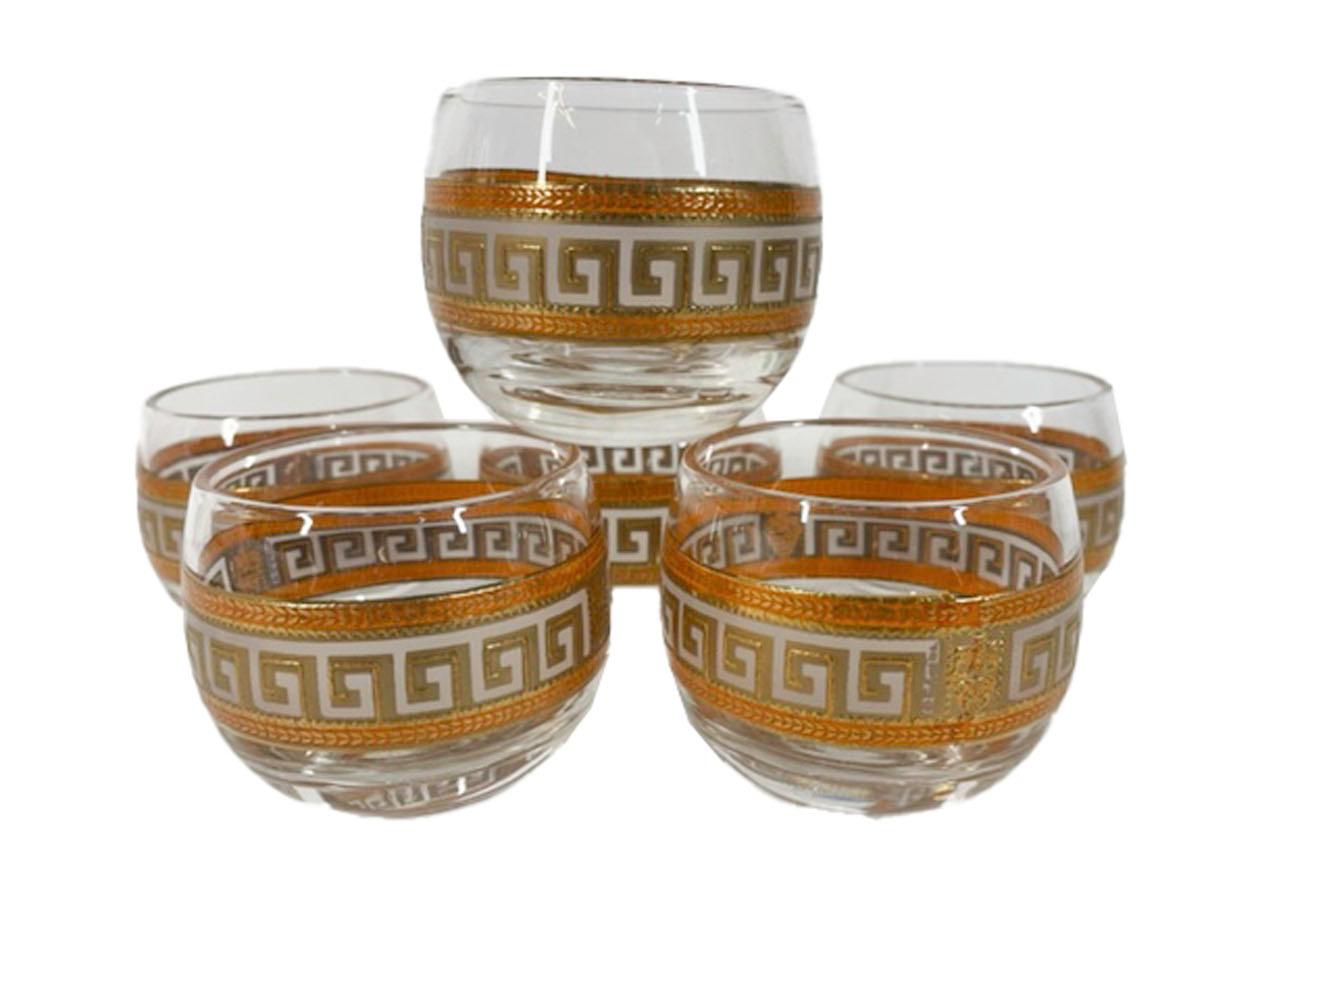 Mid-Century modern cocktail set consisting of cocktail pitcher w/stir rod and 6 roly poly cocktail glasses all decorated with Greek key and other classical motifs in translucent white and orange enamel with 22 karat gold.